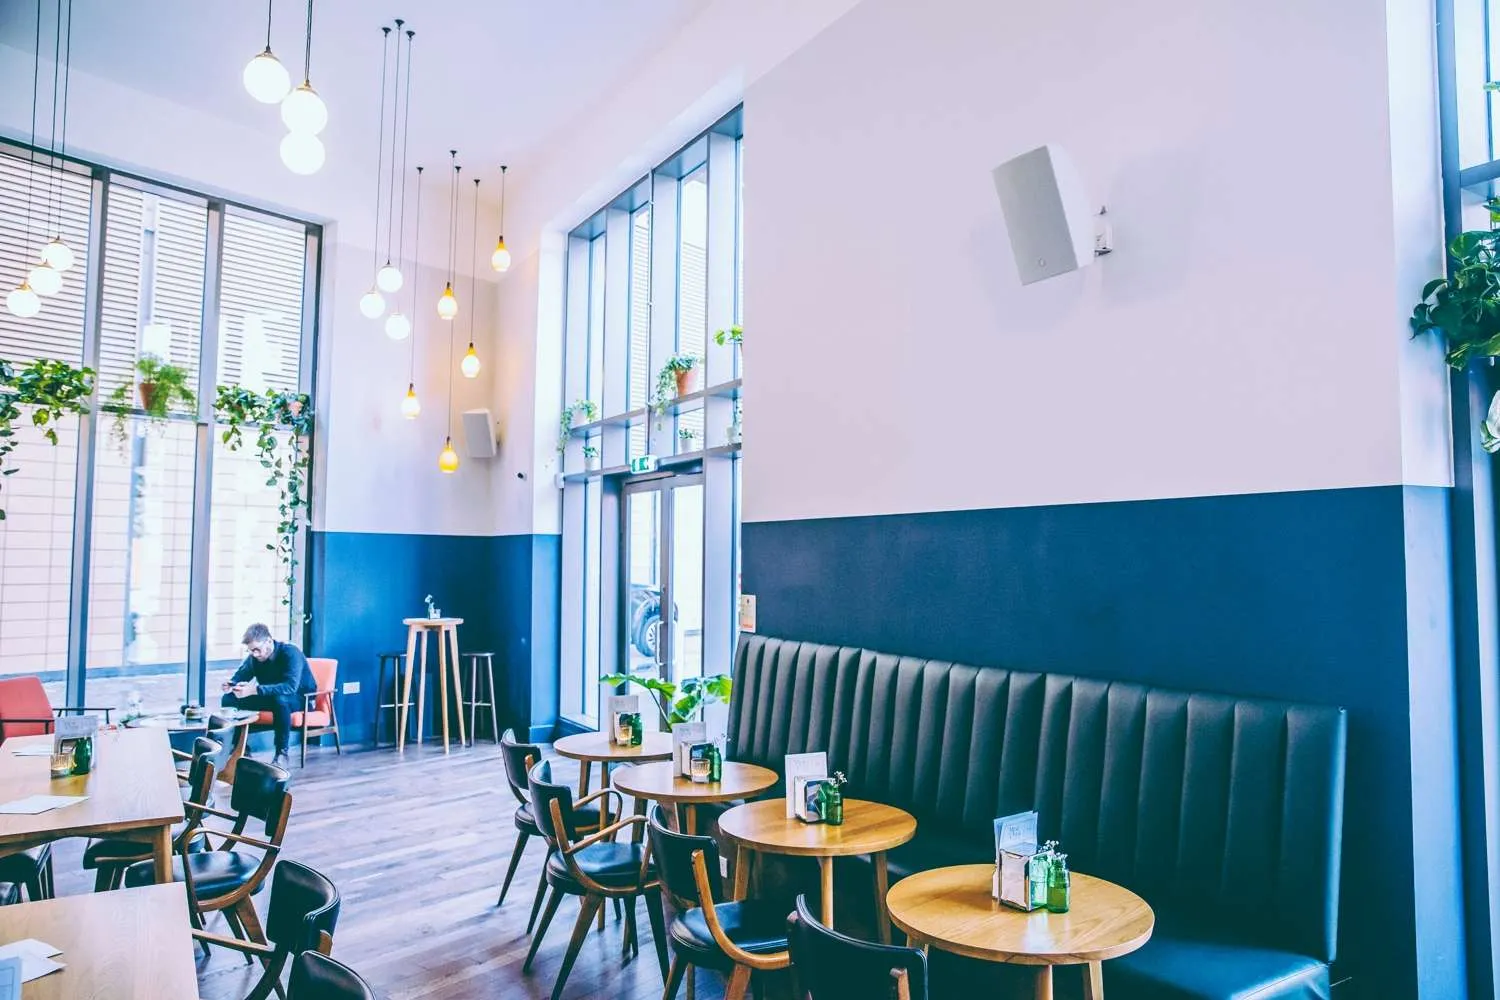 A modern and stylish cafe interior with high ceilings and a serene atmosphere, featuring cozy seating arrangements, pendant lighting, decorative greenery, and an AV installation from Manchester. A patron is seen enjoying the calm